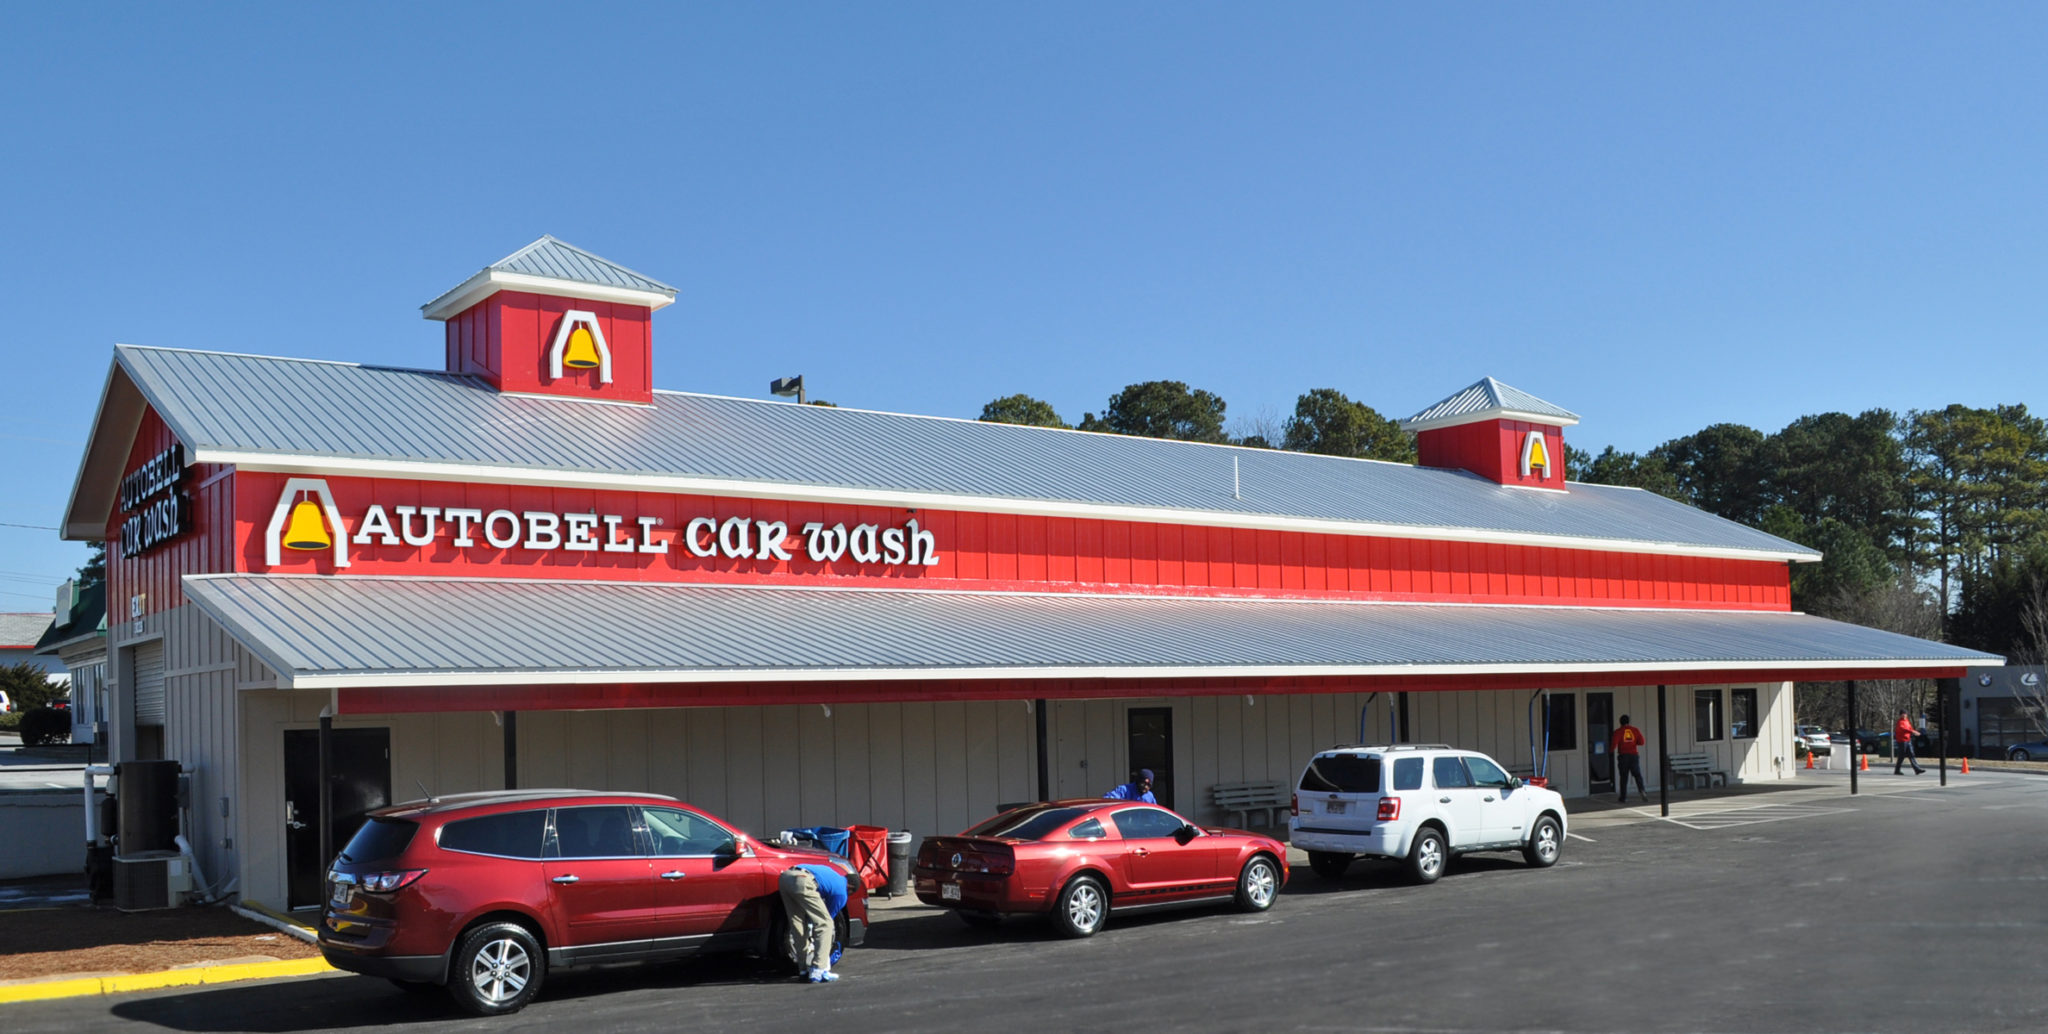 East Cobb Autobell Car Wash Offering Free Car Washes